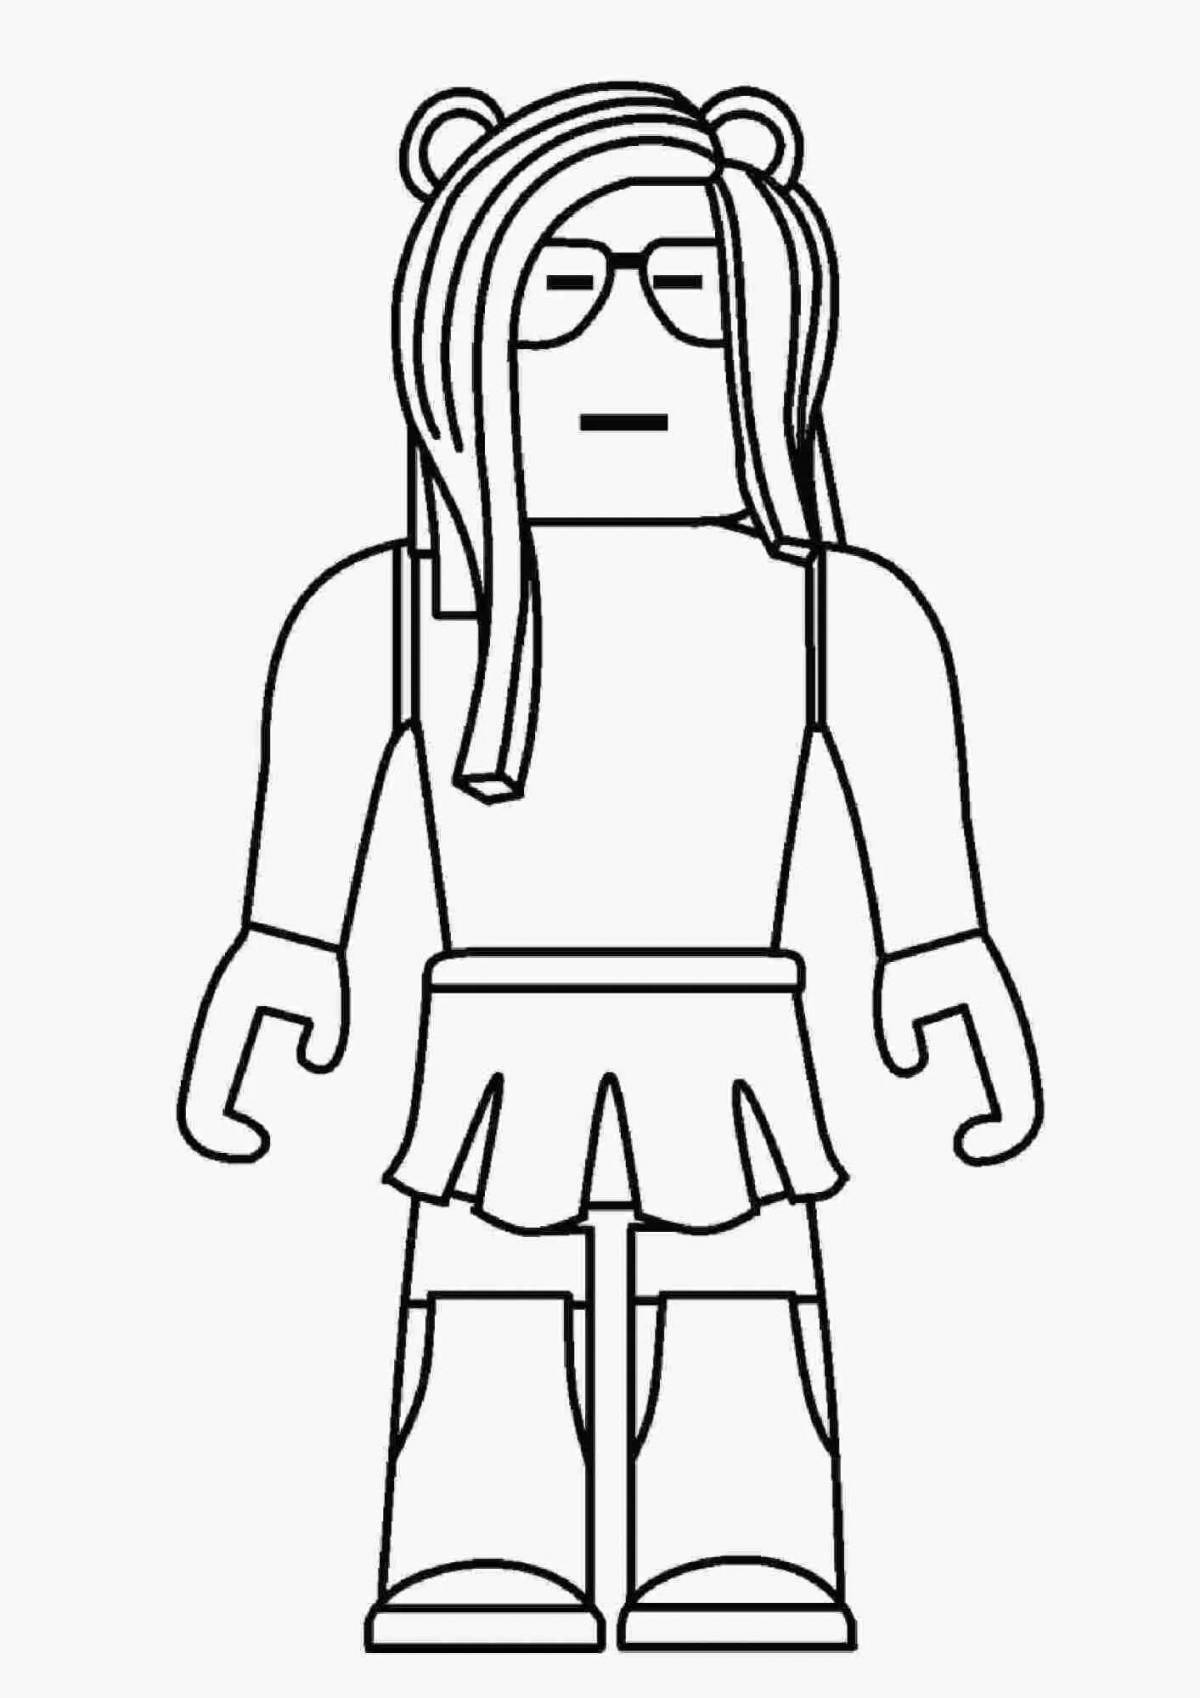 Colorful roblox coloring pages for girls